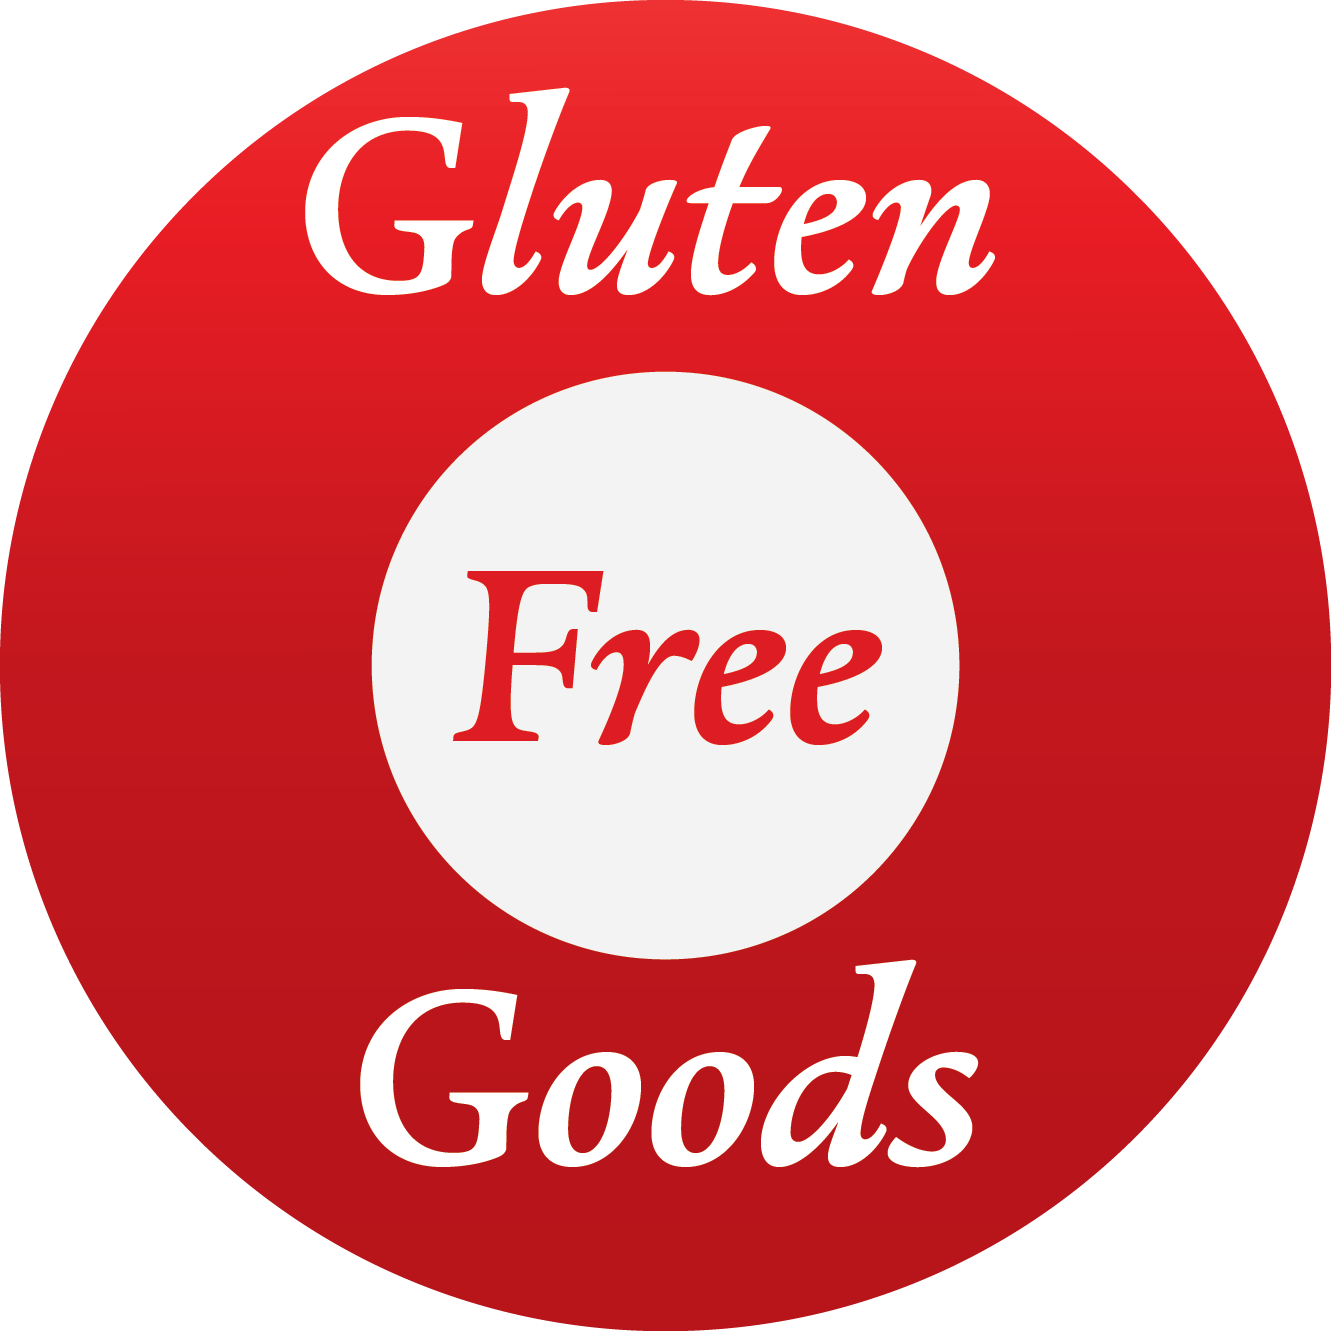 Gluten-Free Goods is an online resource for anyone with #CeliacDisease, gluten intolerance or those practicing a #glutenfree diet! http://t.co/KX2v5vtnMc